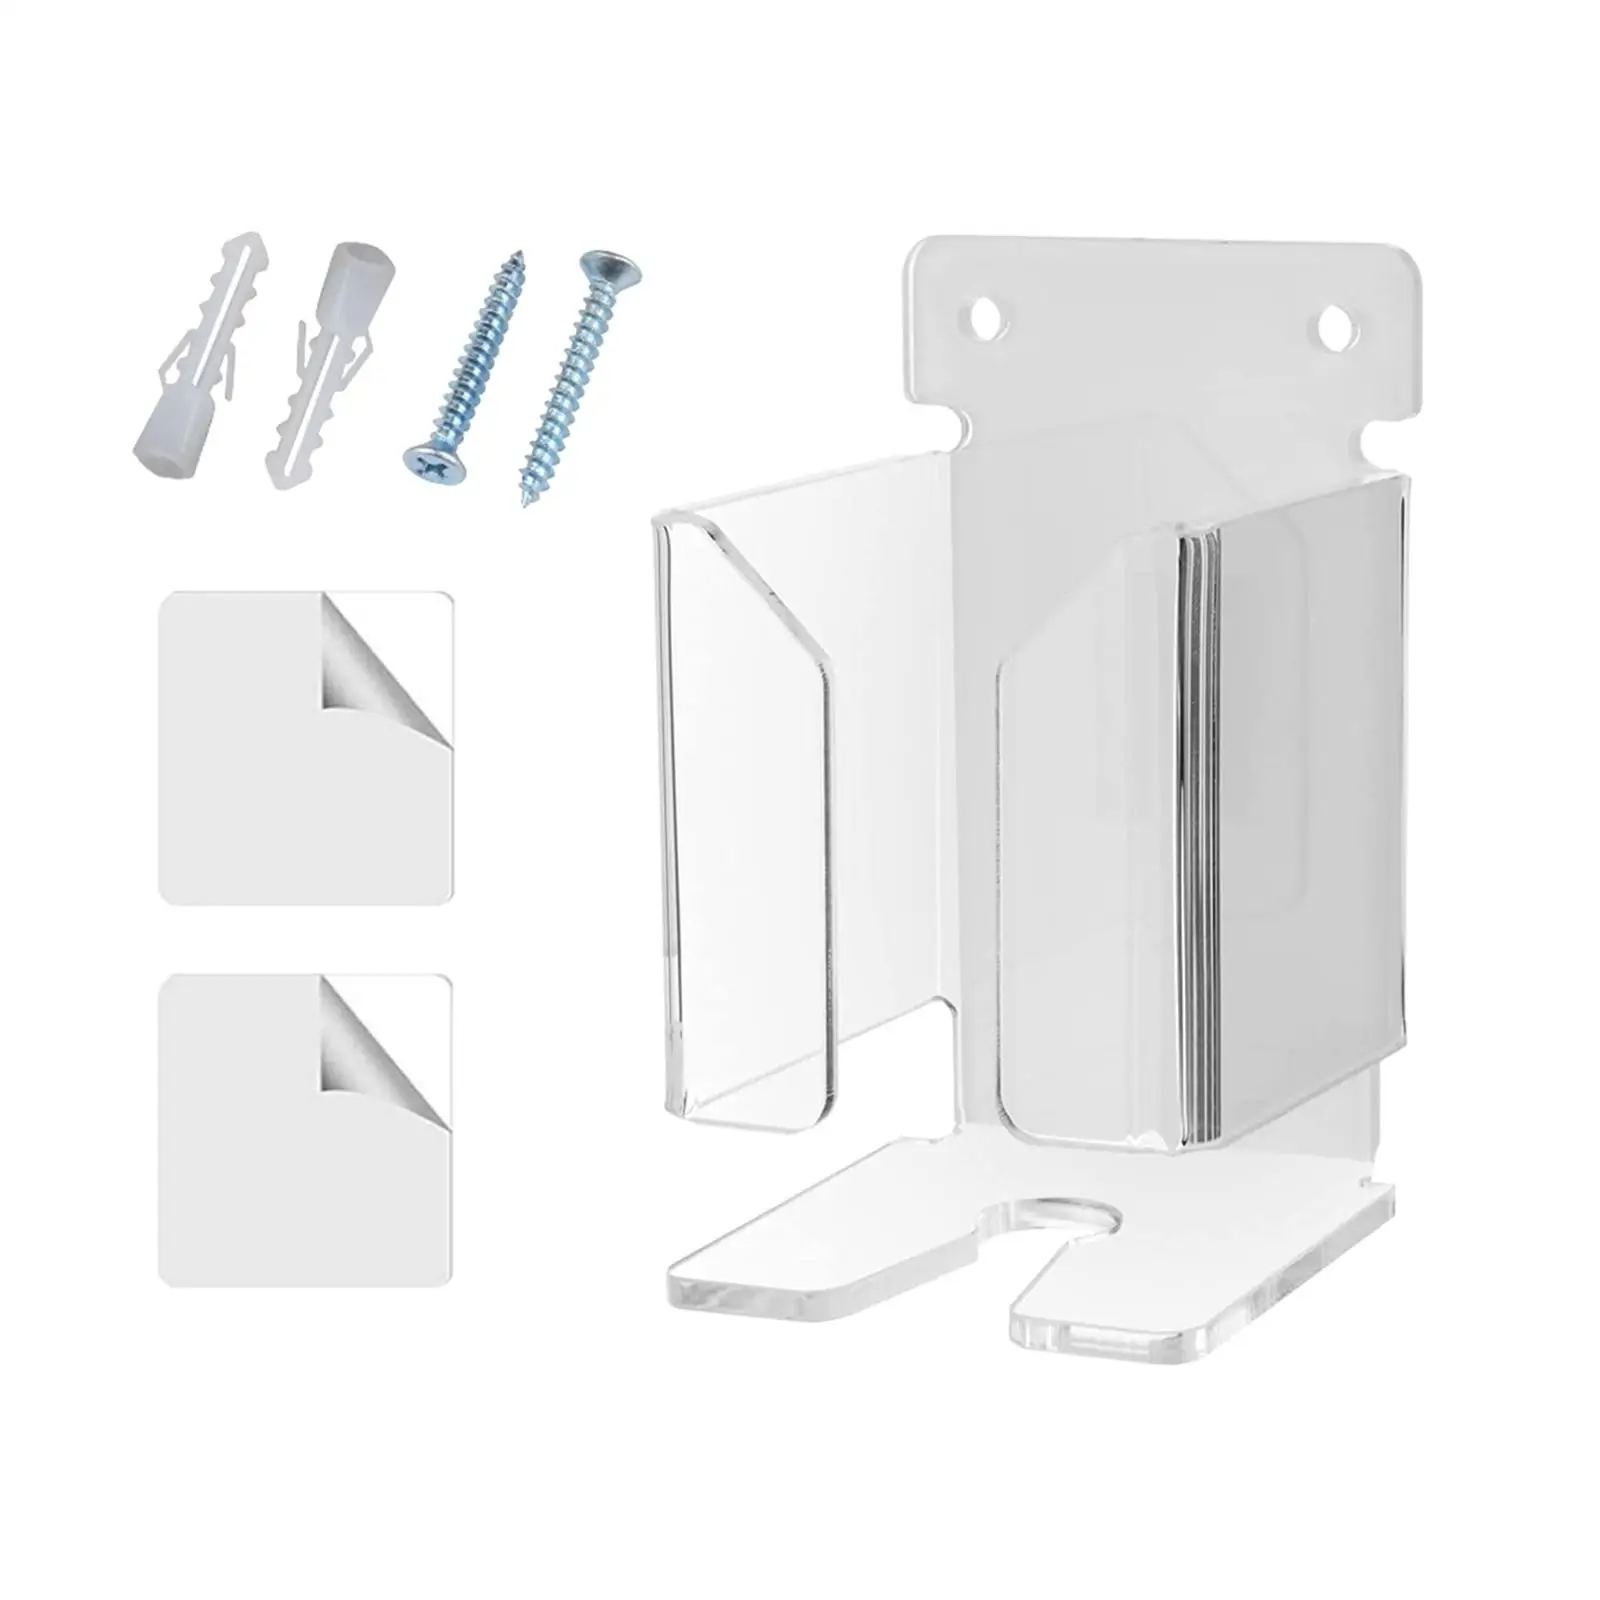 Electric Shaver Wall Holder Stand Two Installation for Men Utility Rack Shaver Organizer for Shower Electric Shaver Bathroom